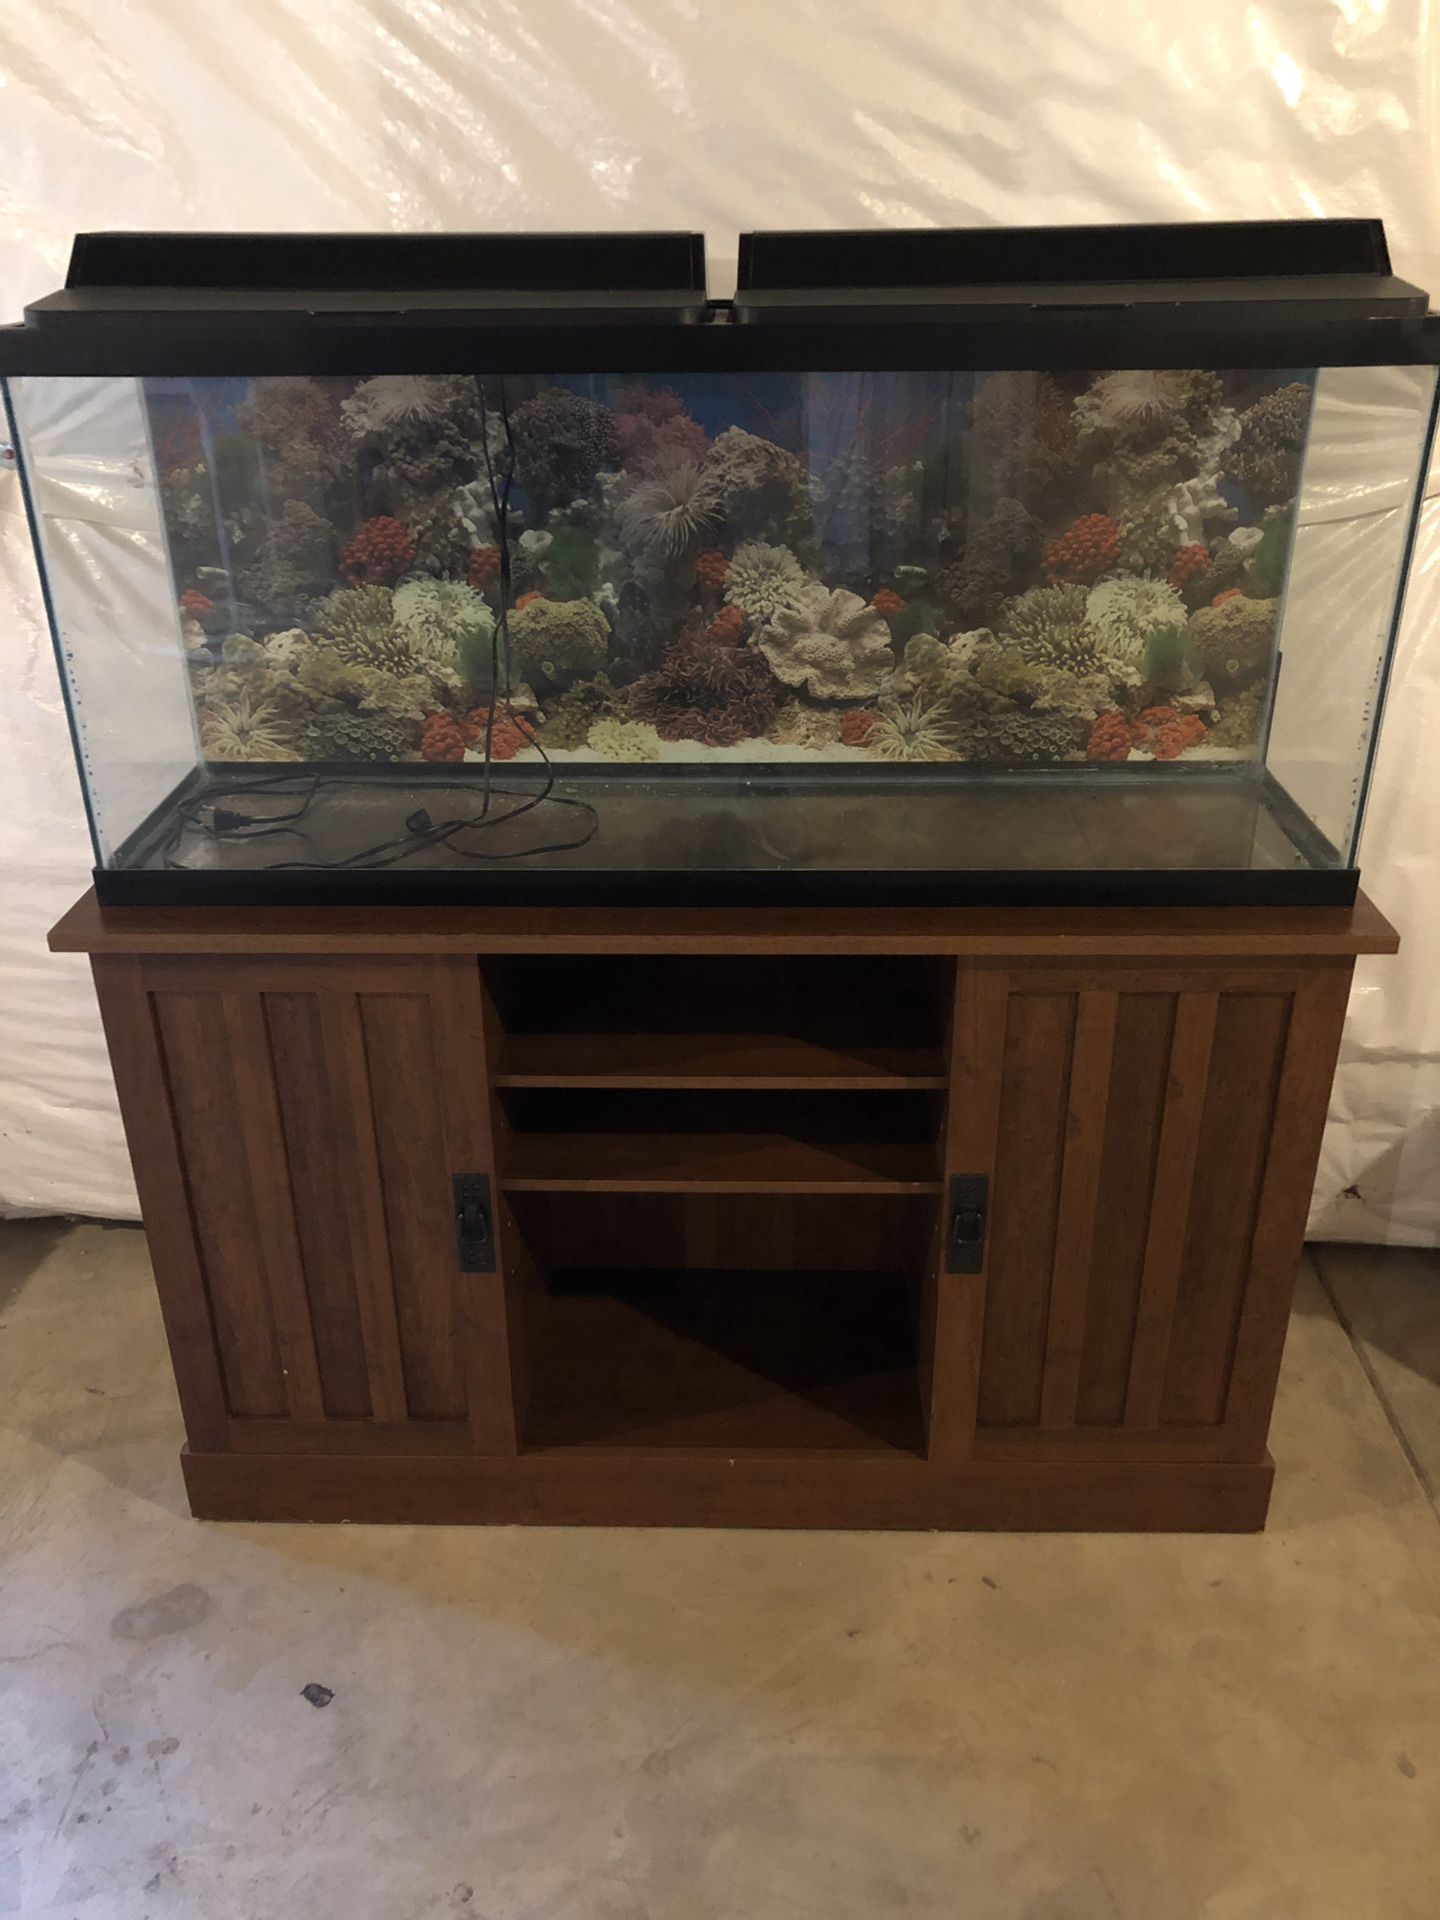 Fish tank, Cabinet, and lots of accessories!